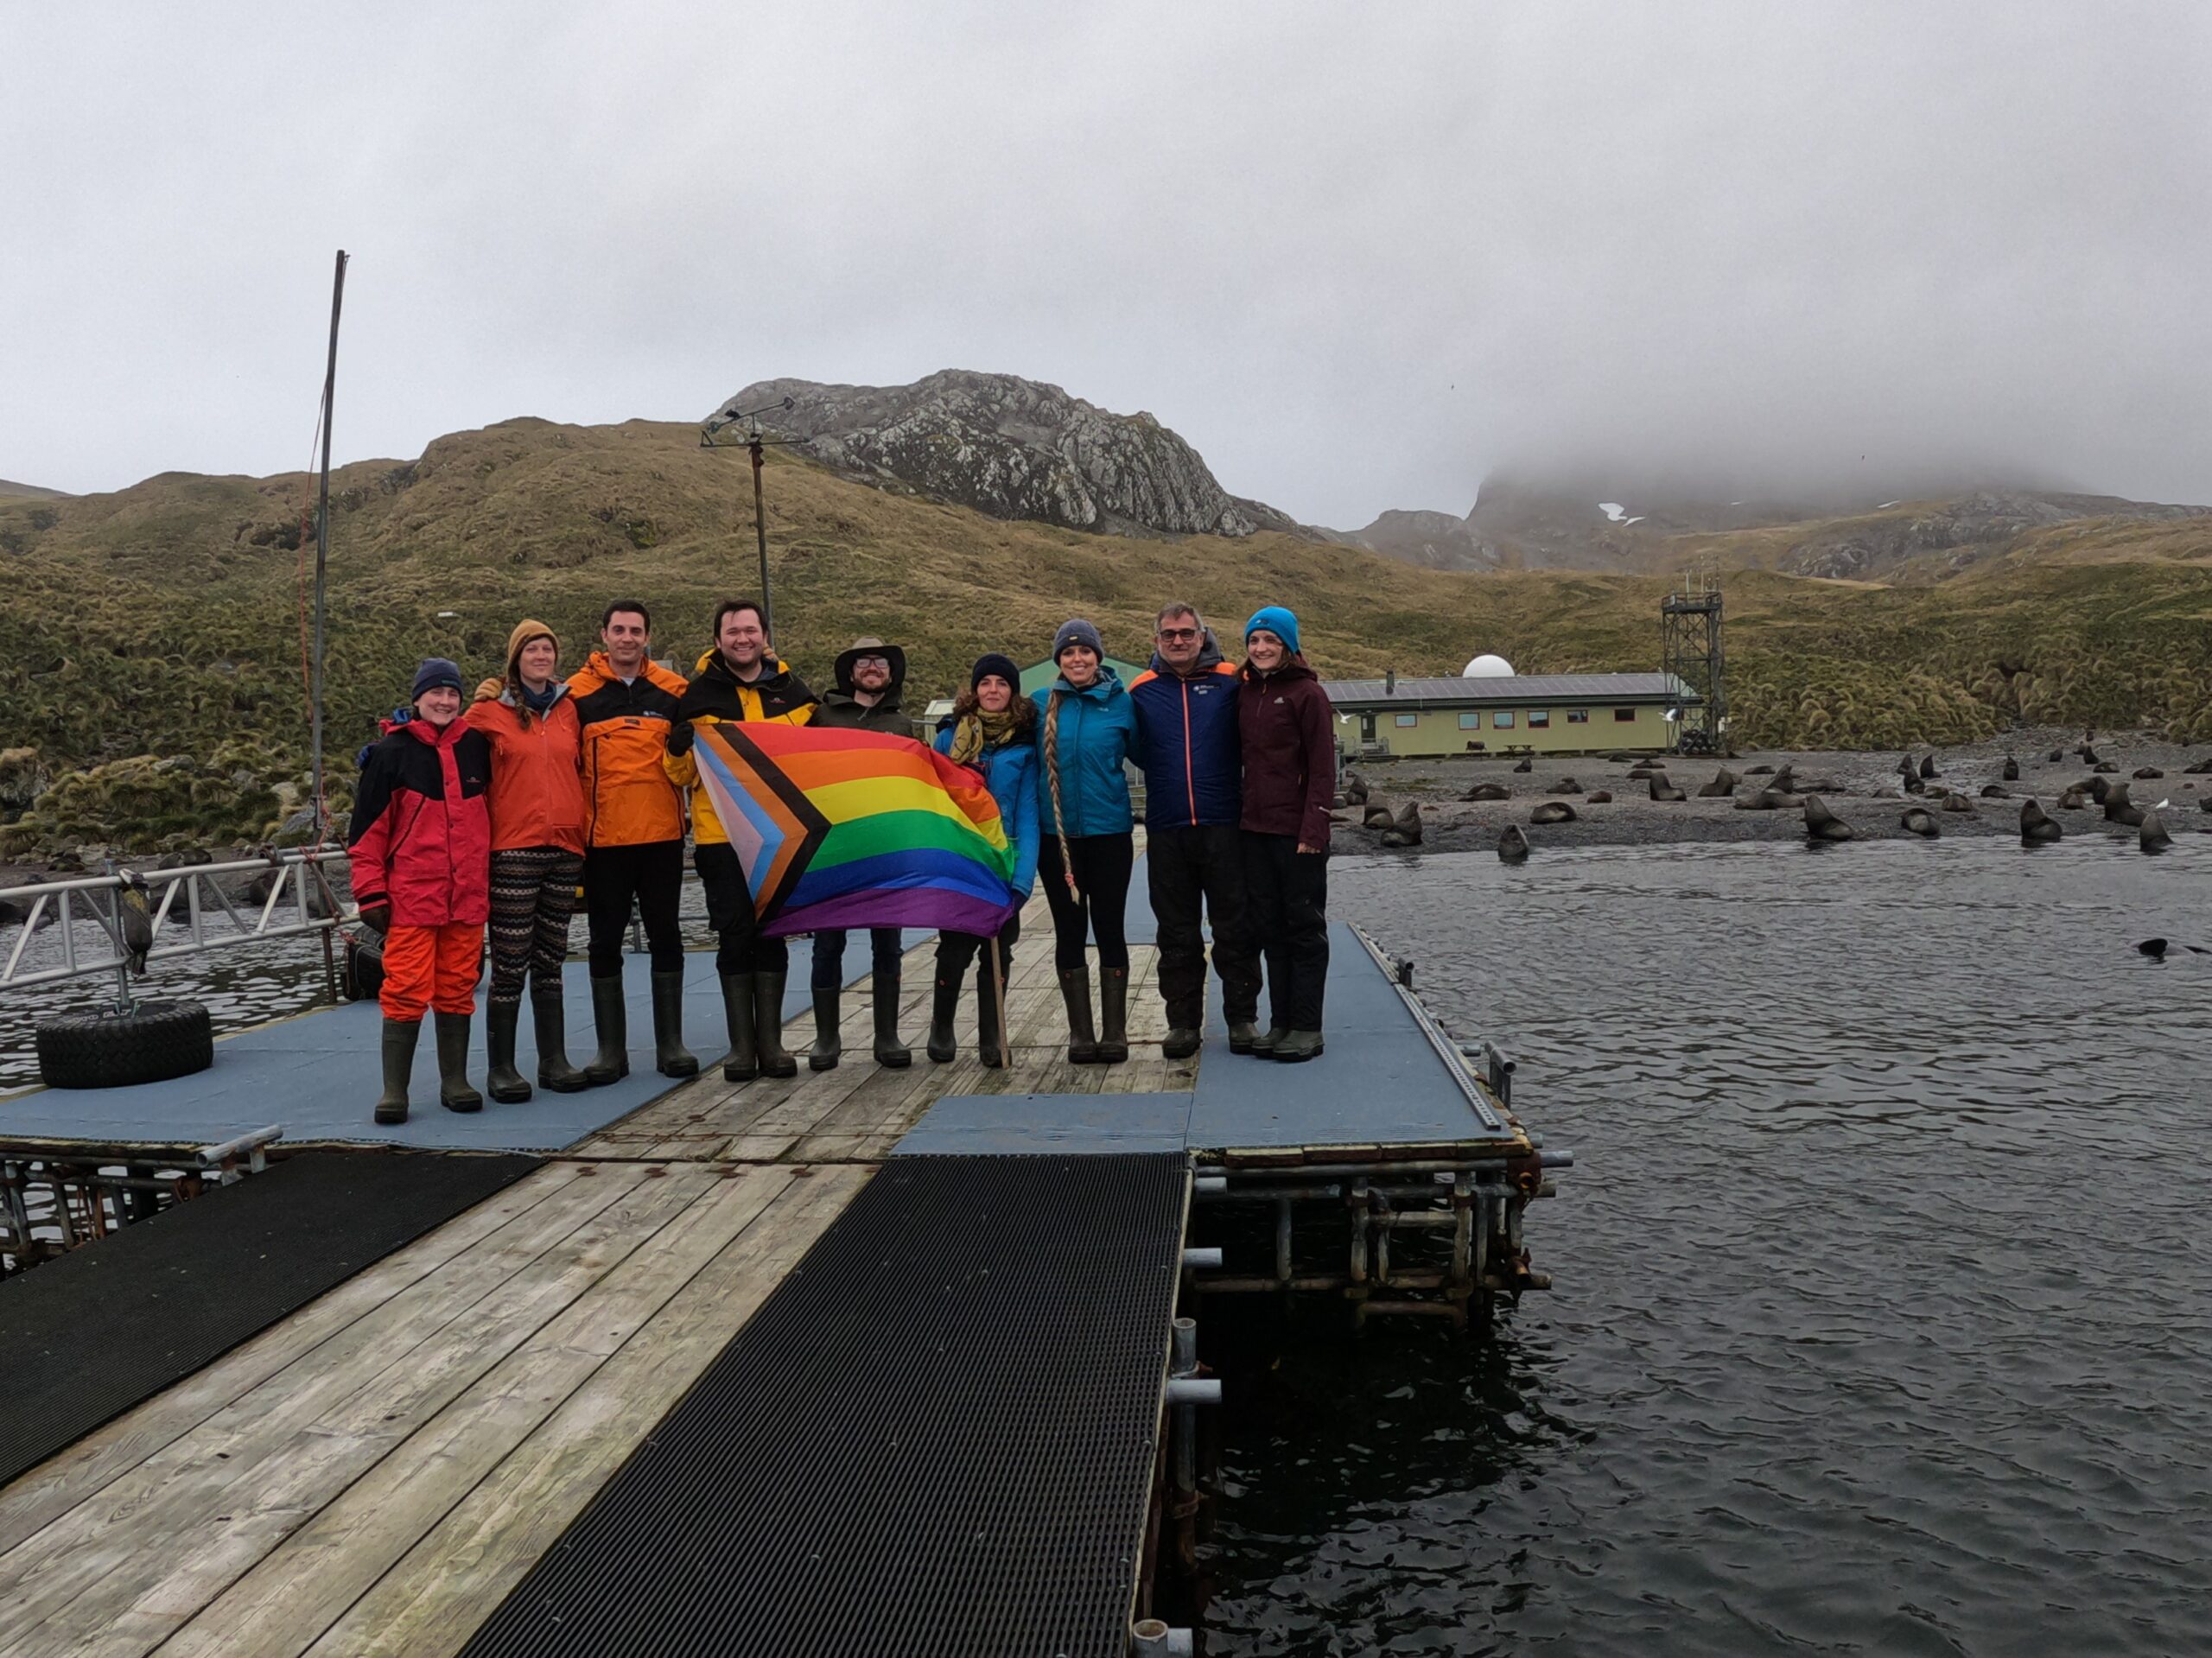 Staff at Bird Island Research Station with the Pride Flag